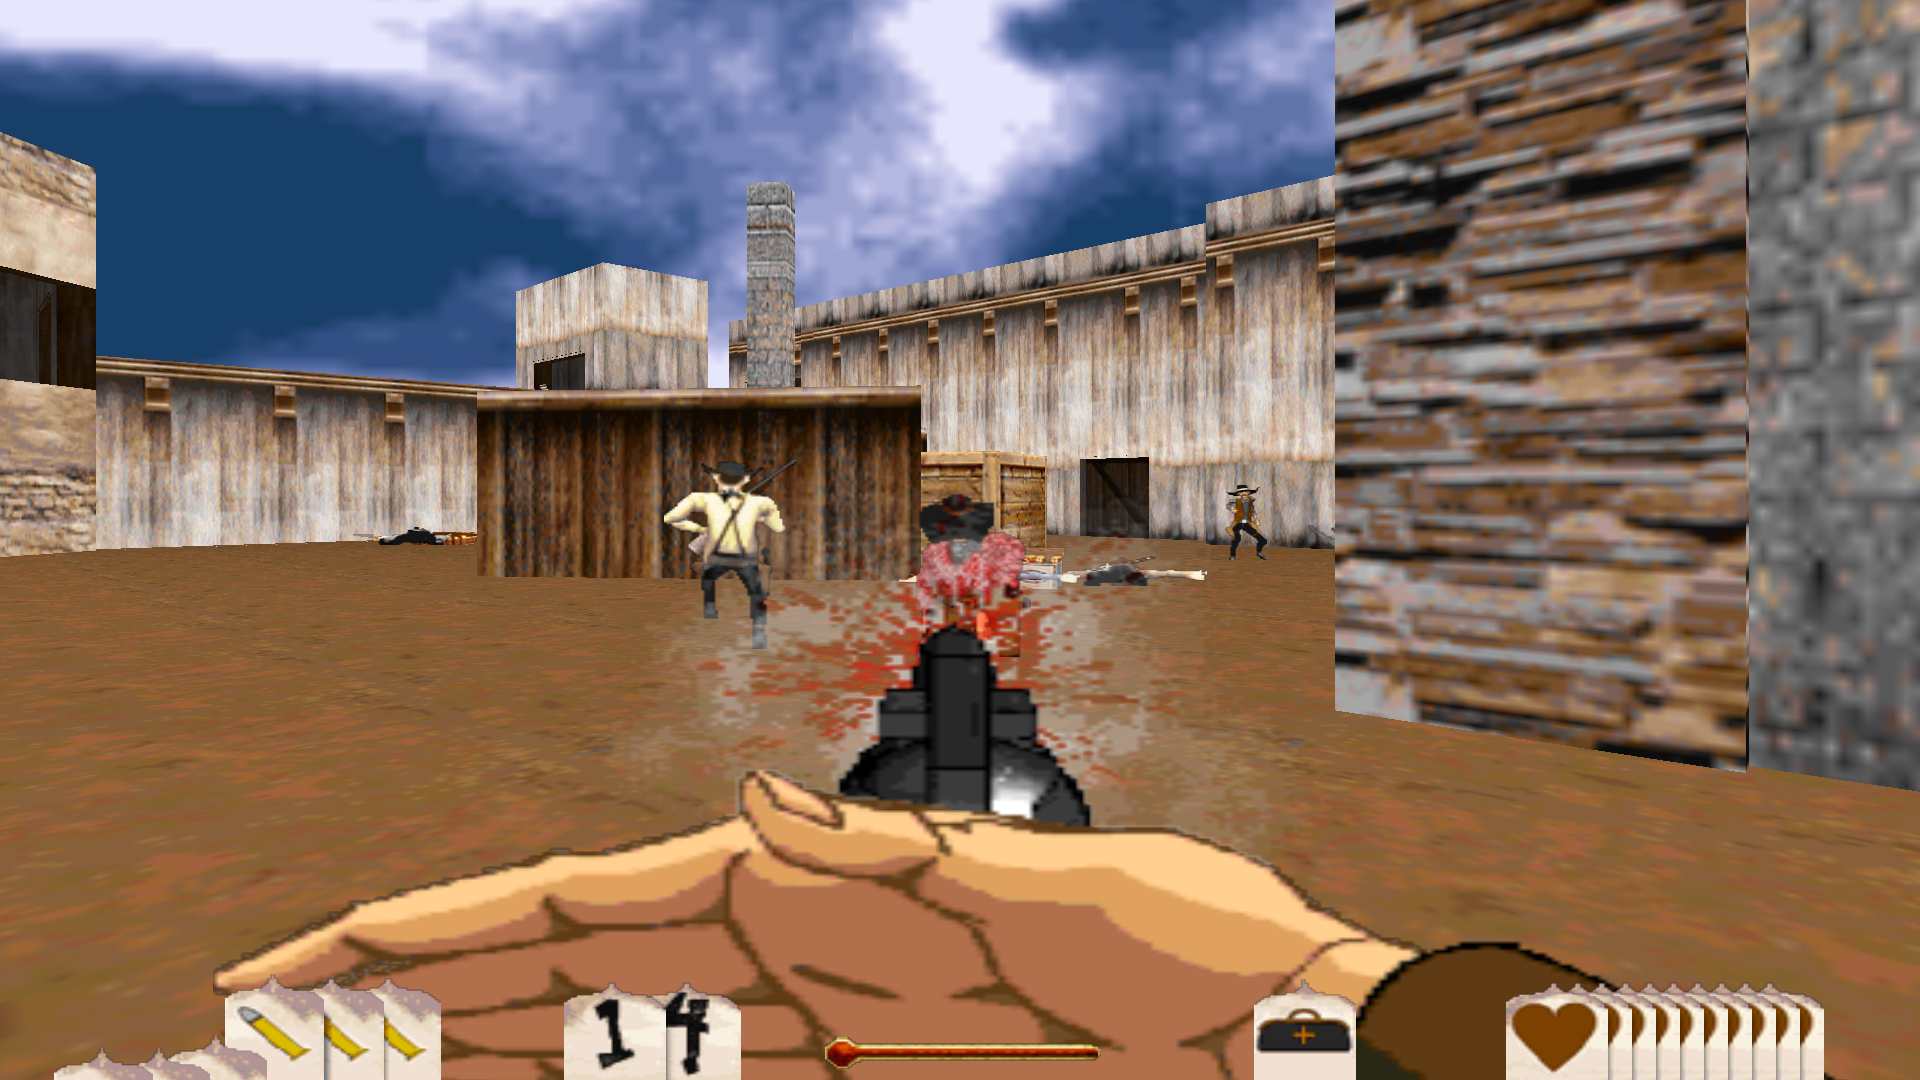 outlaws pc game download